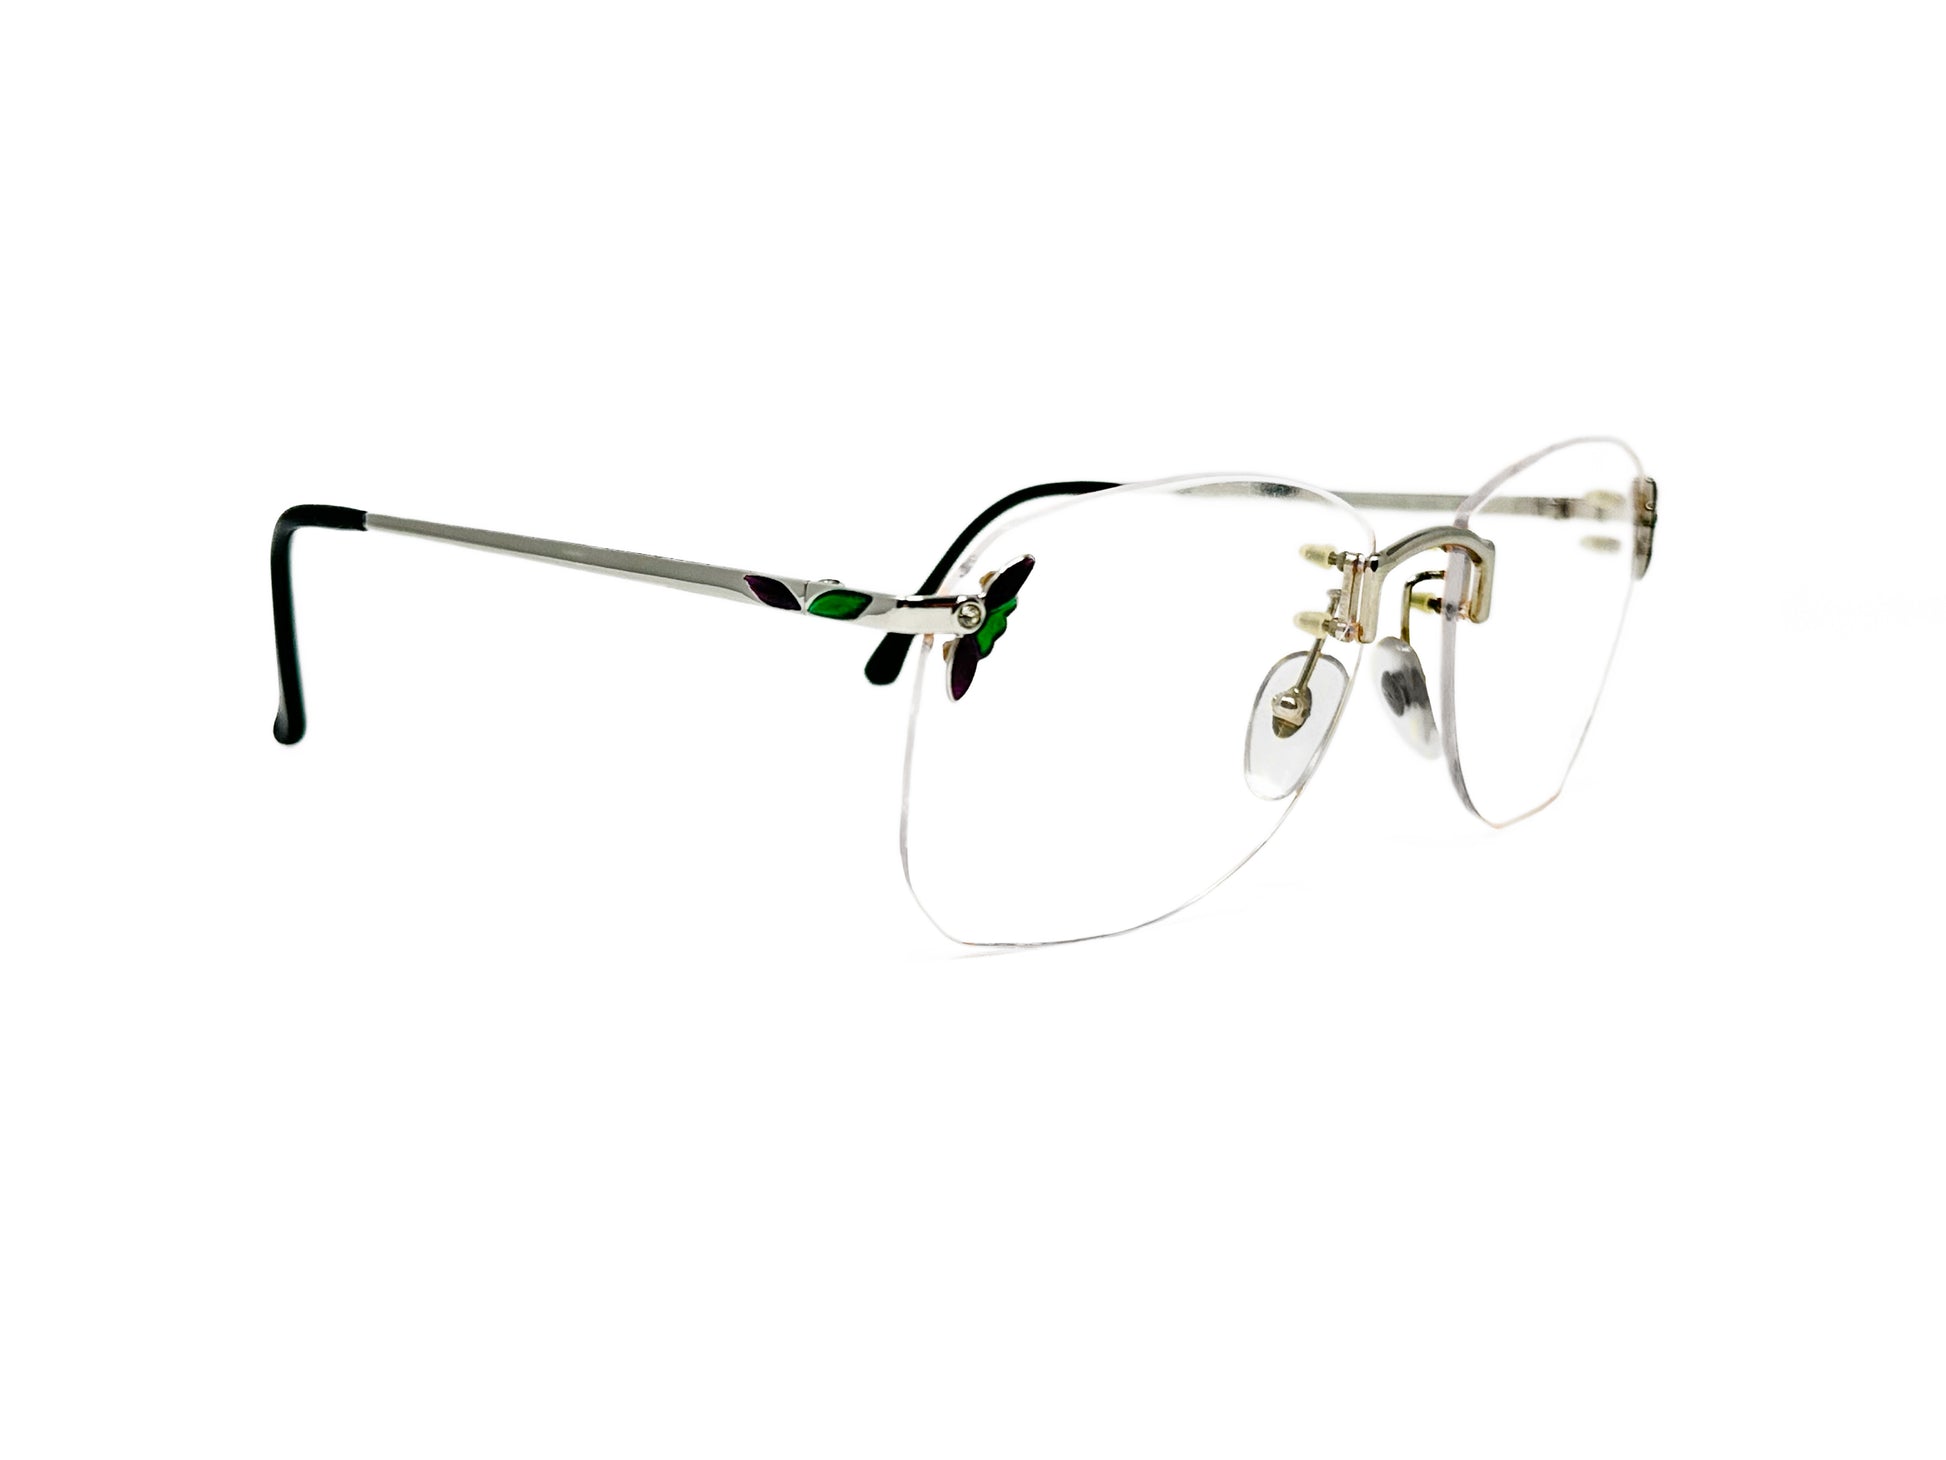 Luxottica metal rimless optical frame with flowery accent on corner near hinge. Model: 7572. Color: P413 - Silver metal with green accents. Side view.